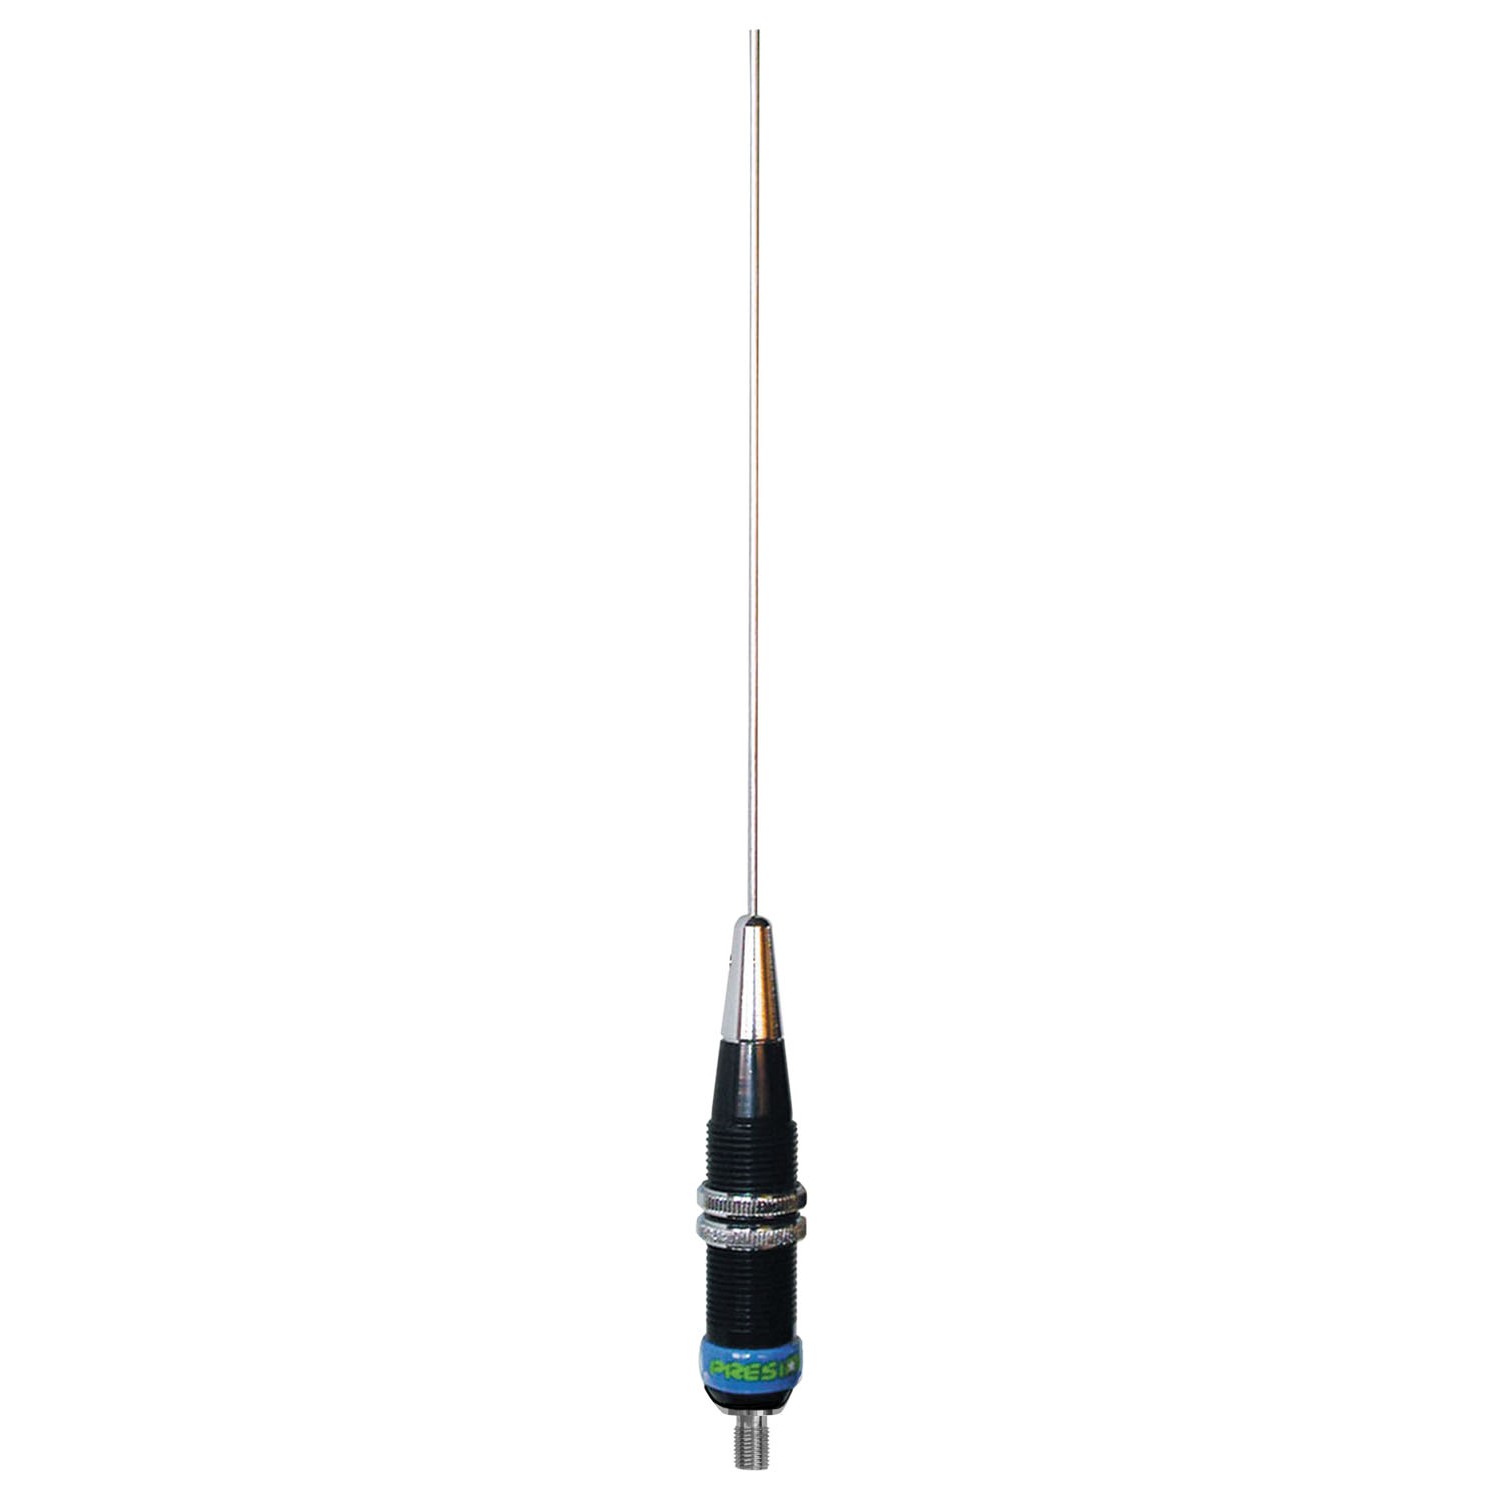 President - 40.16" Tall 100 Watt 1/4 Wave 26-28 Mhz Adjustable Cb Antenna With 3/8"X24" Threaded Base, Stainless Whip, Weather C